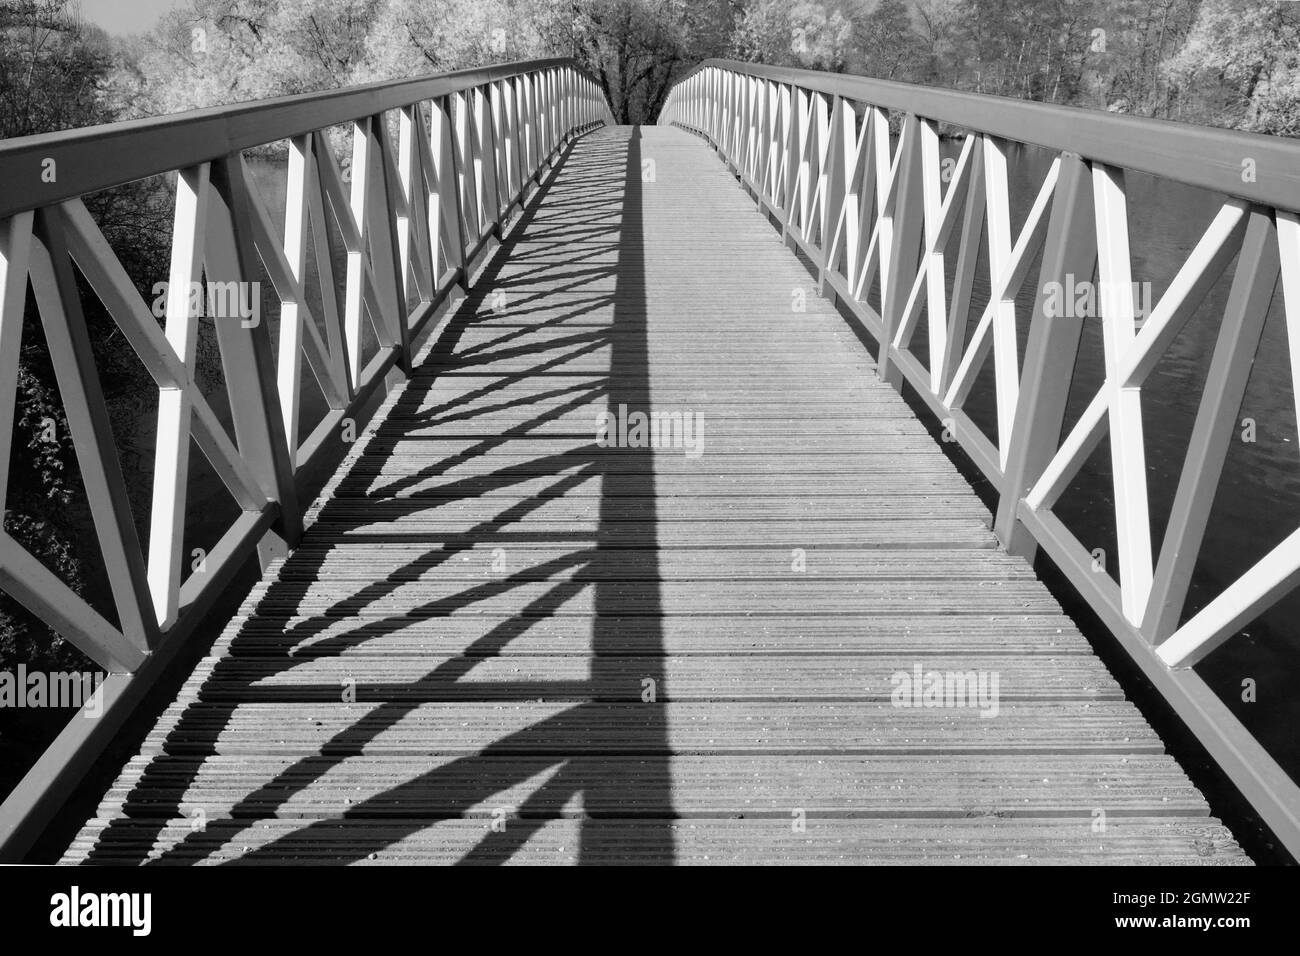 Footbridge over the Thames by Kennington, just outside Oxford. This walkway is much frequented by cyclists, joggers and dog owners - not to mention ph Stock Photo